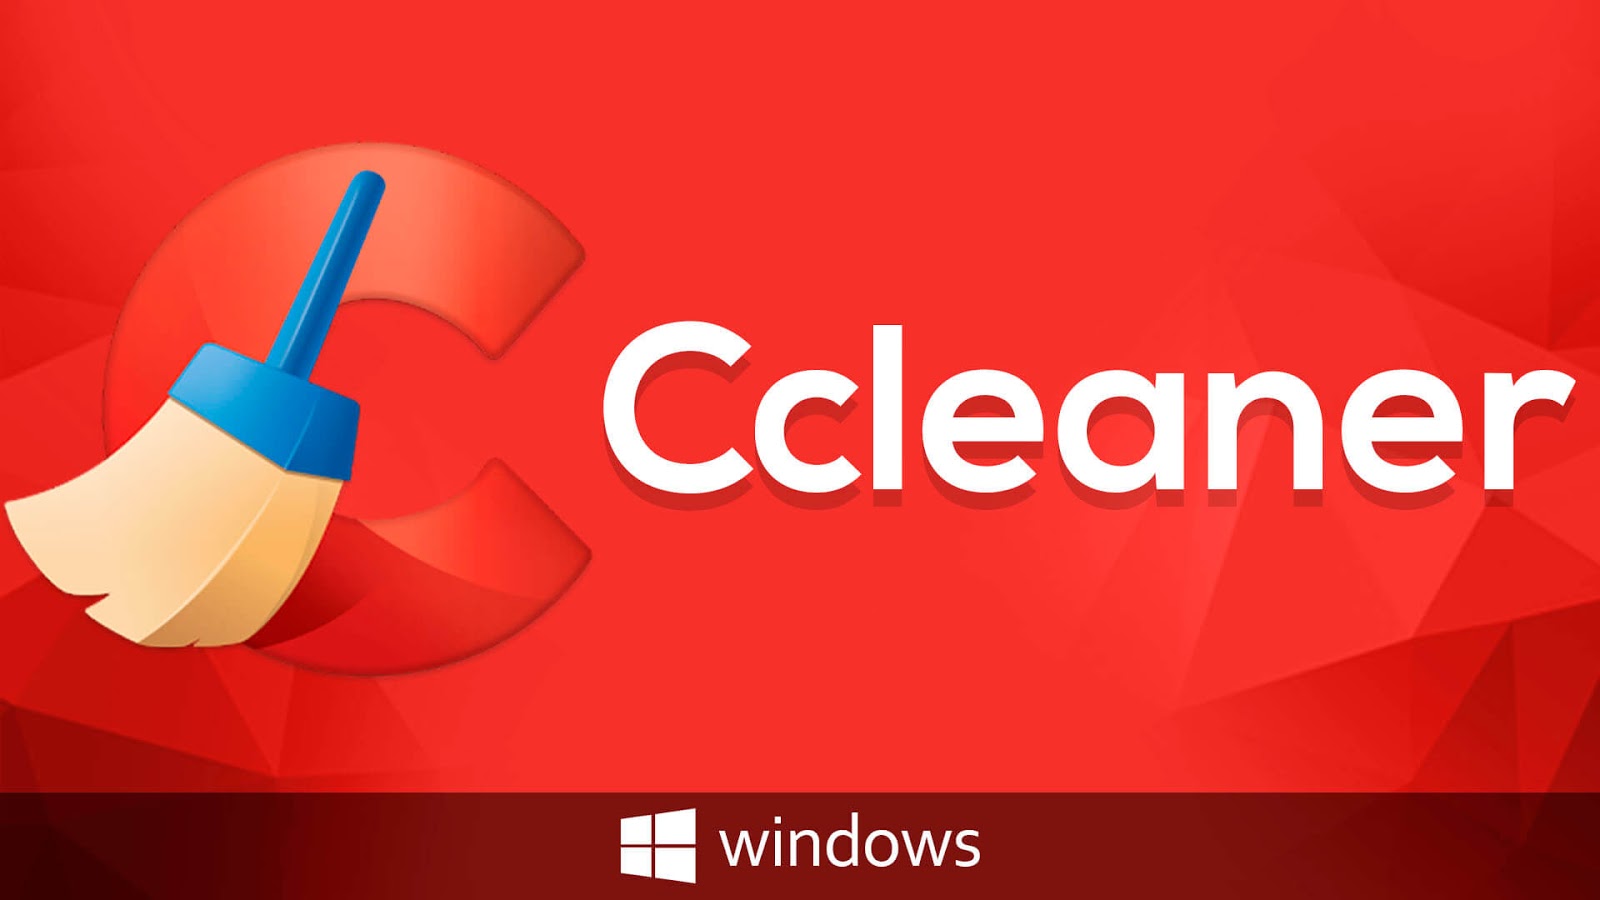 5.61.7392 ccleaner working serial for pro